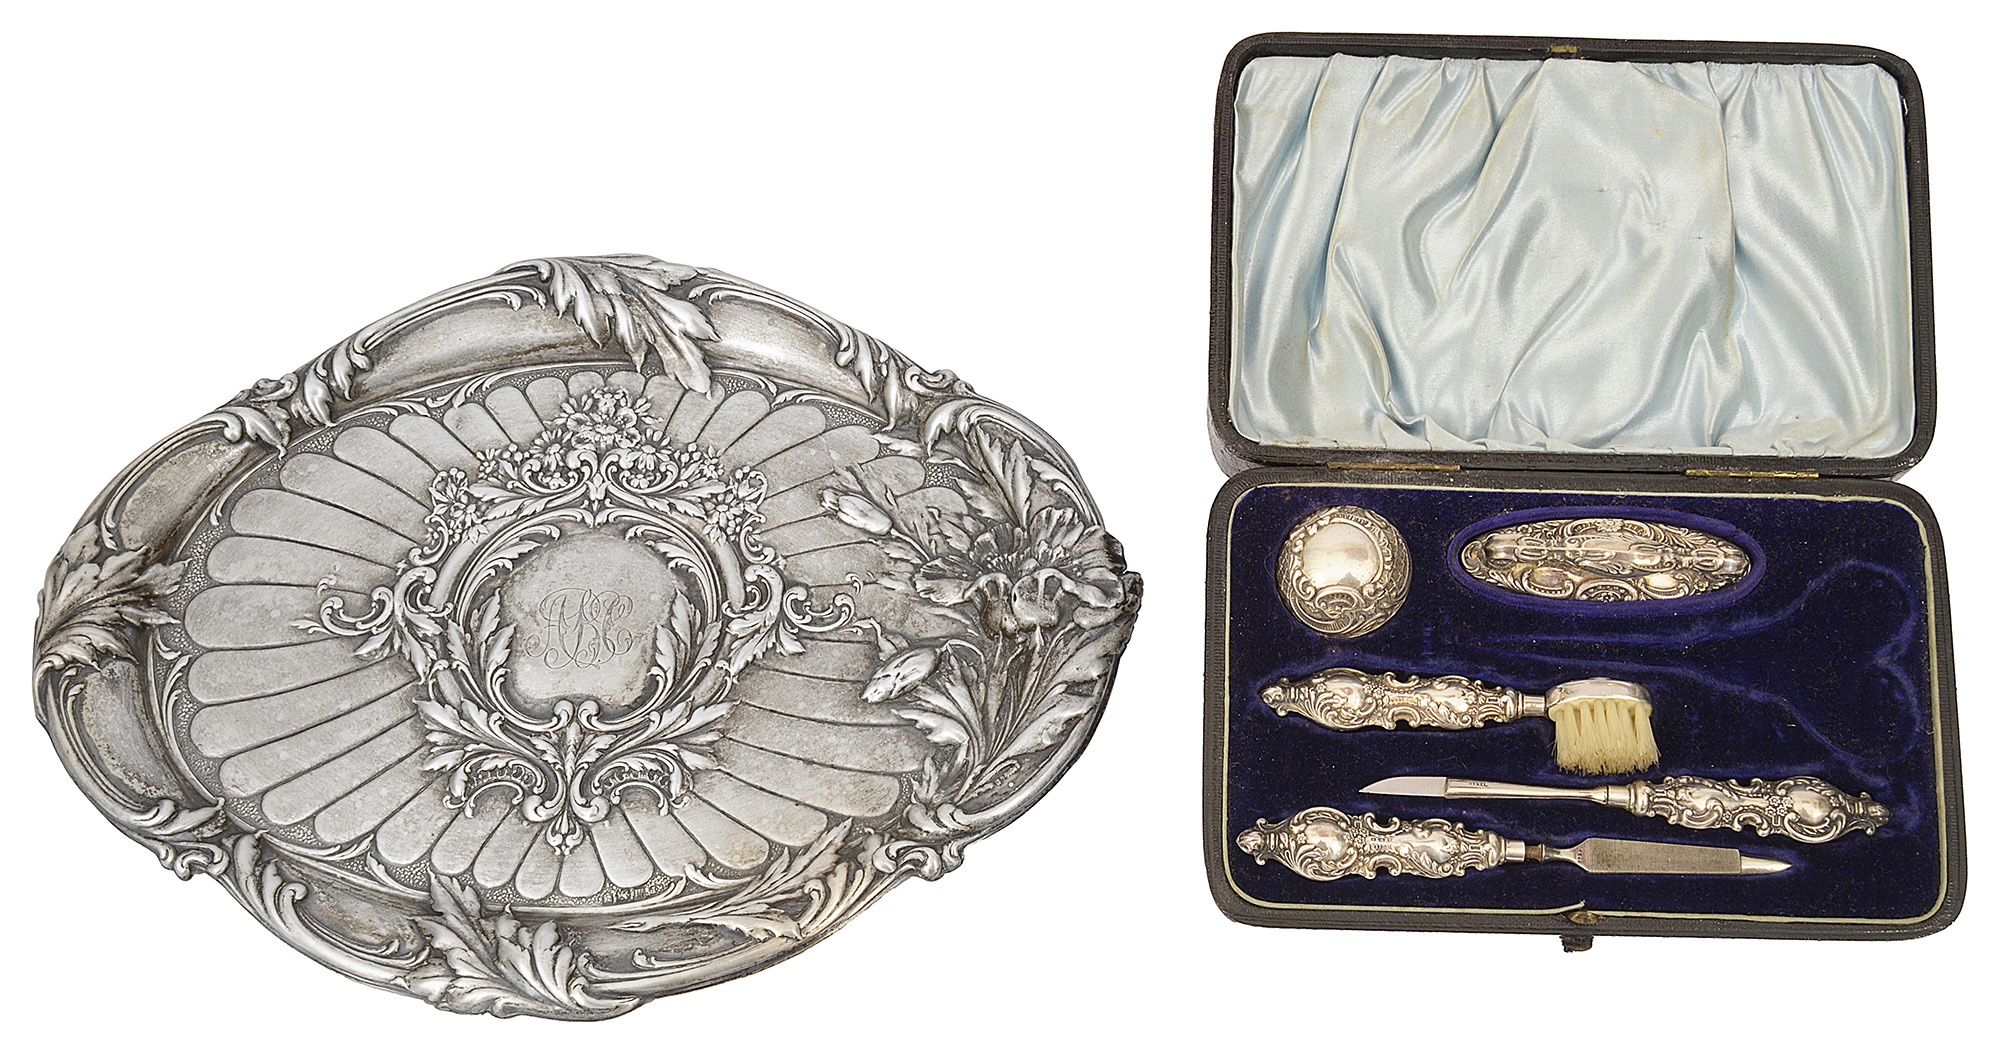 An Edwardian Art Nouveau silver embossed dressing table tray and a late Vict. cased manicure set